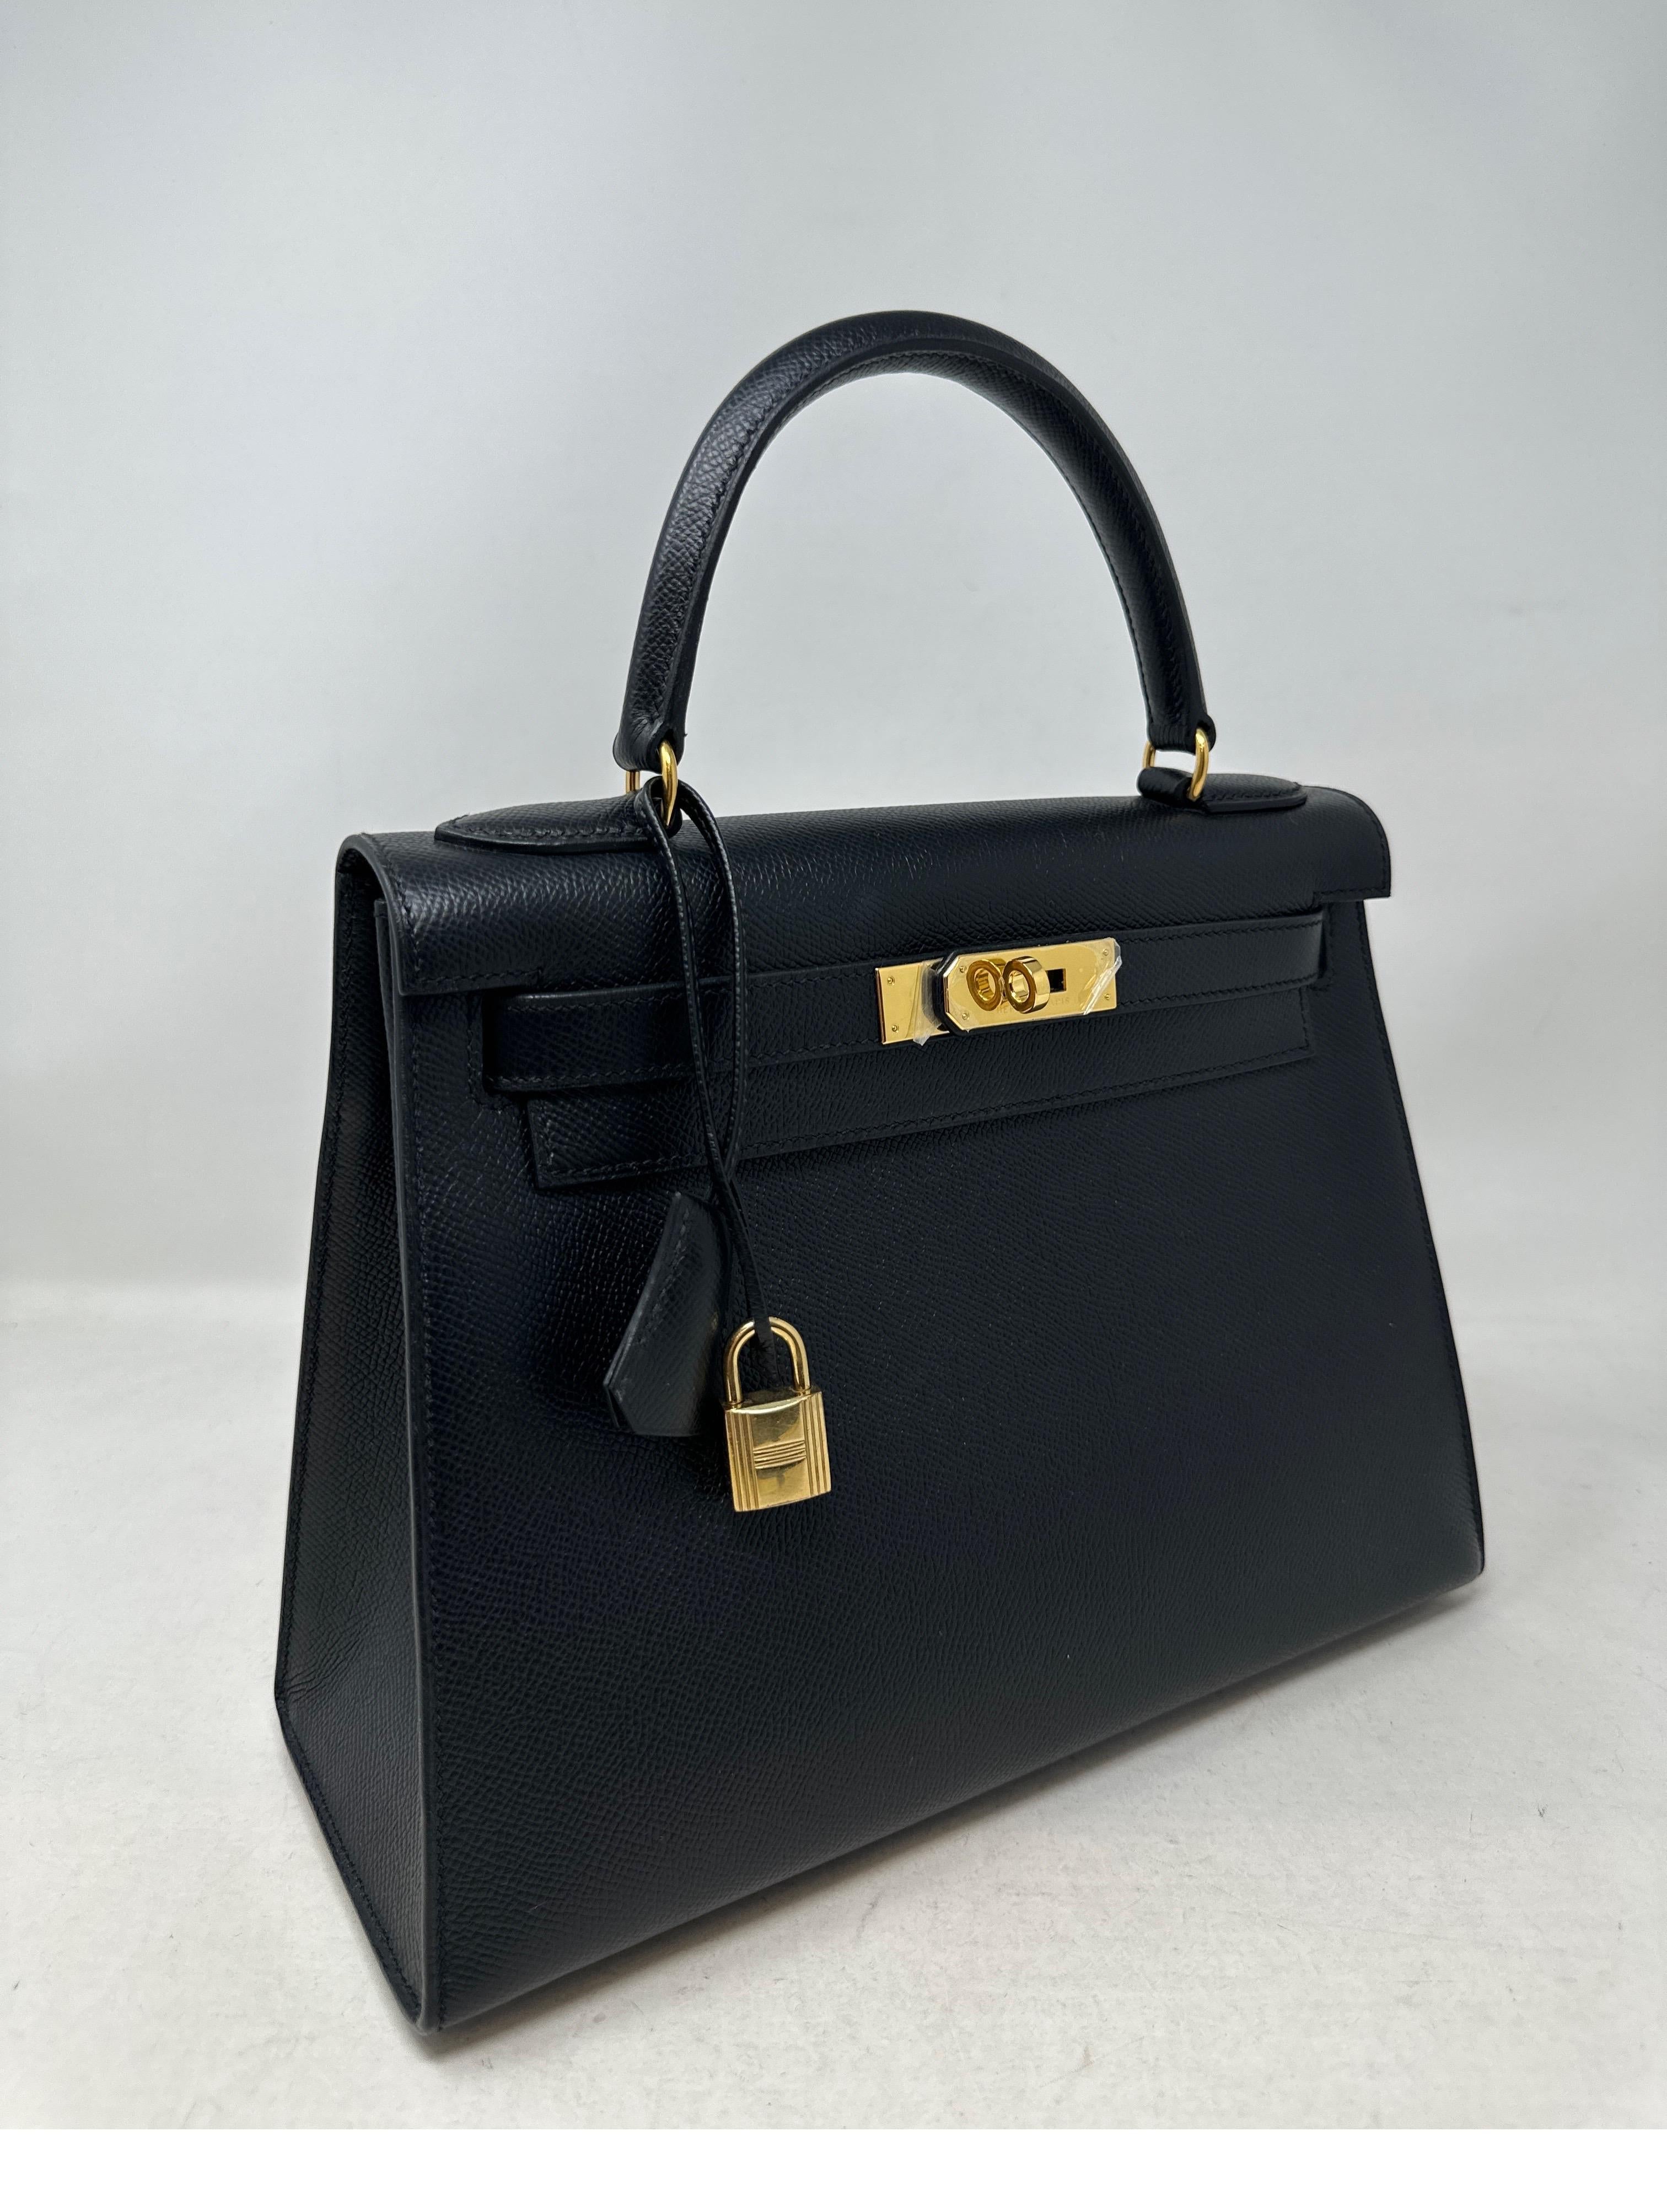 Hermes Black Kelly 28 Bag. Excellent like new condition. Vintage bag but in amazing condition. Selling only the purse. Does not have the strap. Note you can purchase that at boutique. However, this one does not have the strap. Includes clochette,